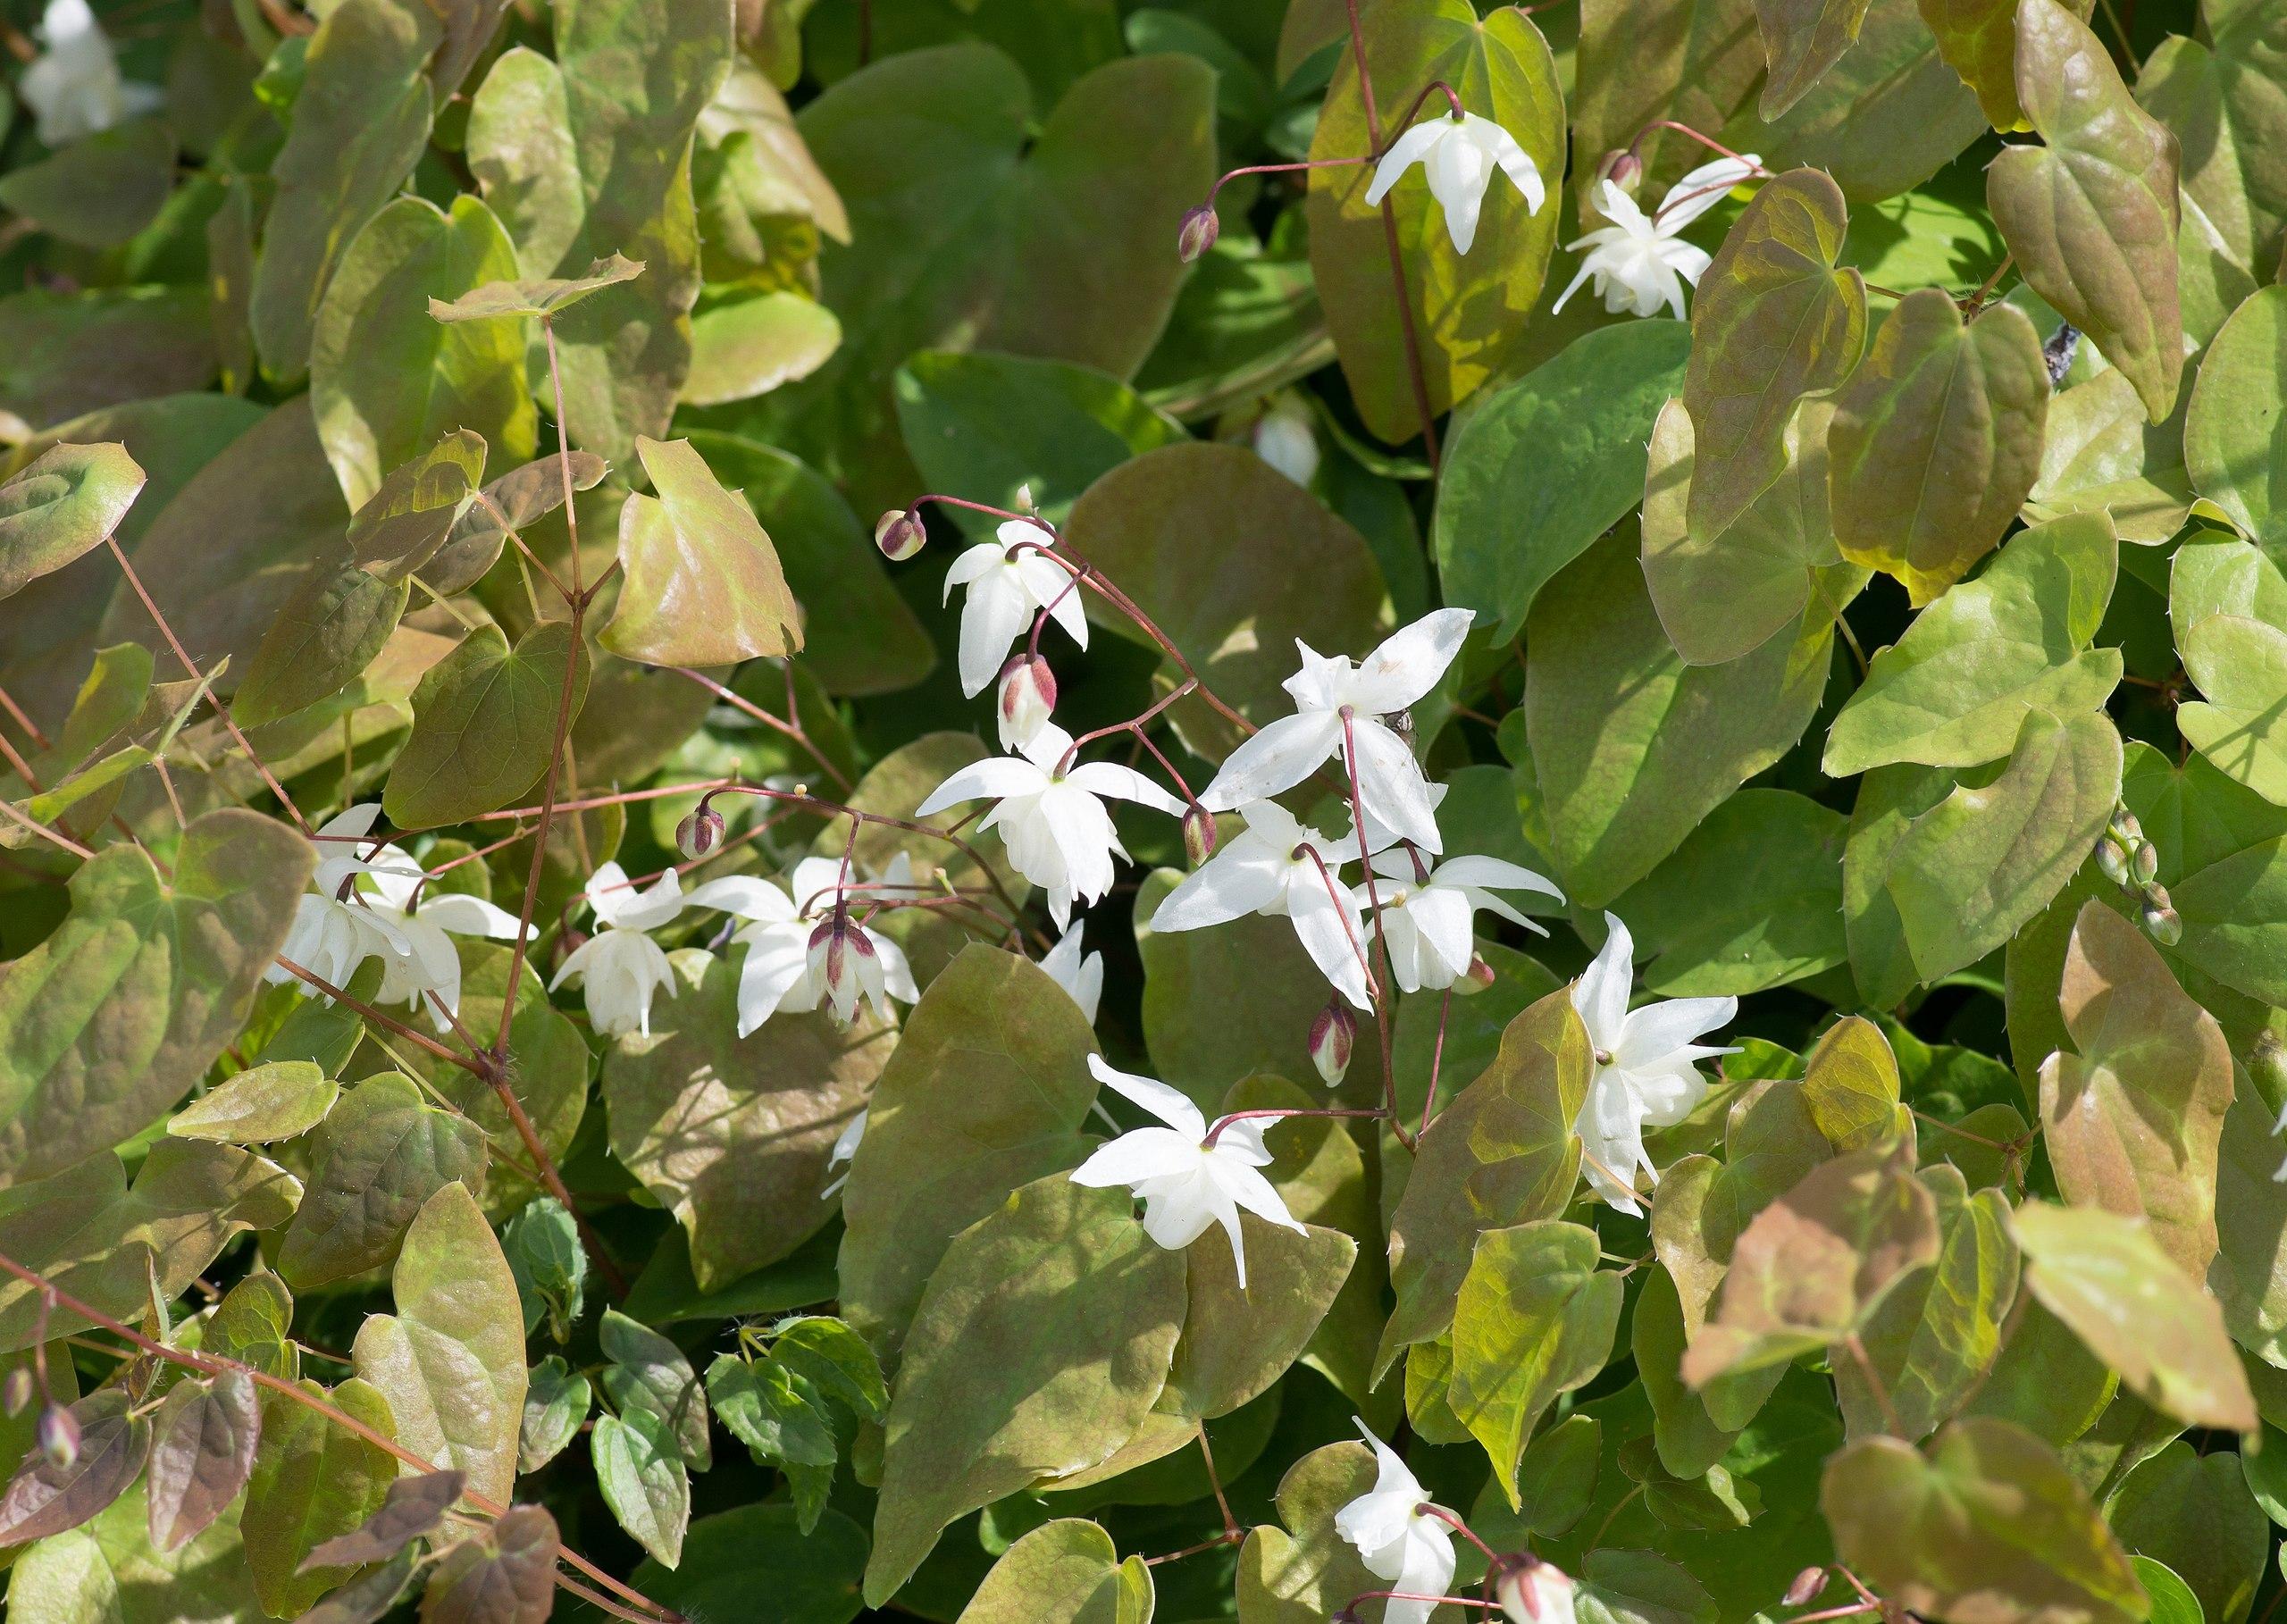 olive-pink foliage with white flowers, white-burgundy buds and brown stems